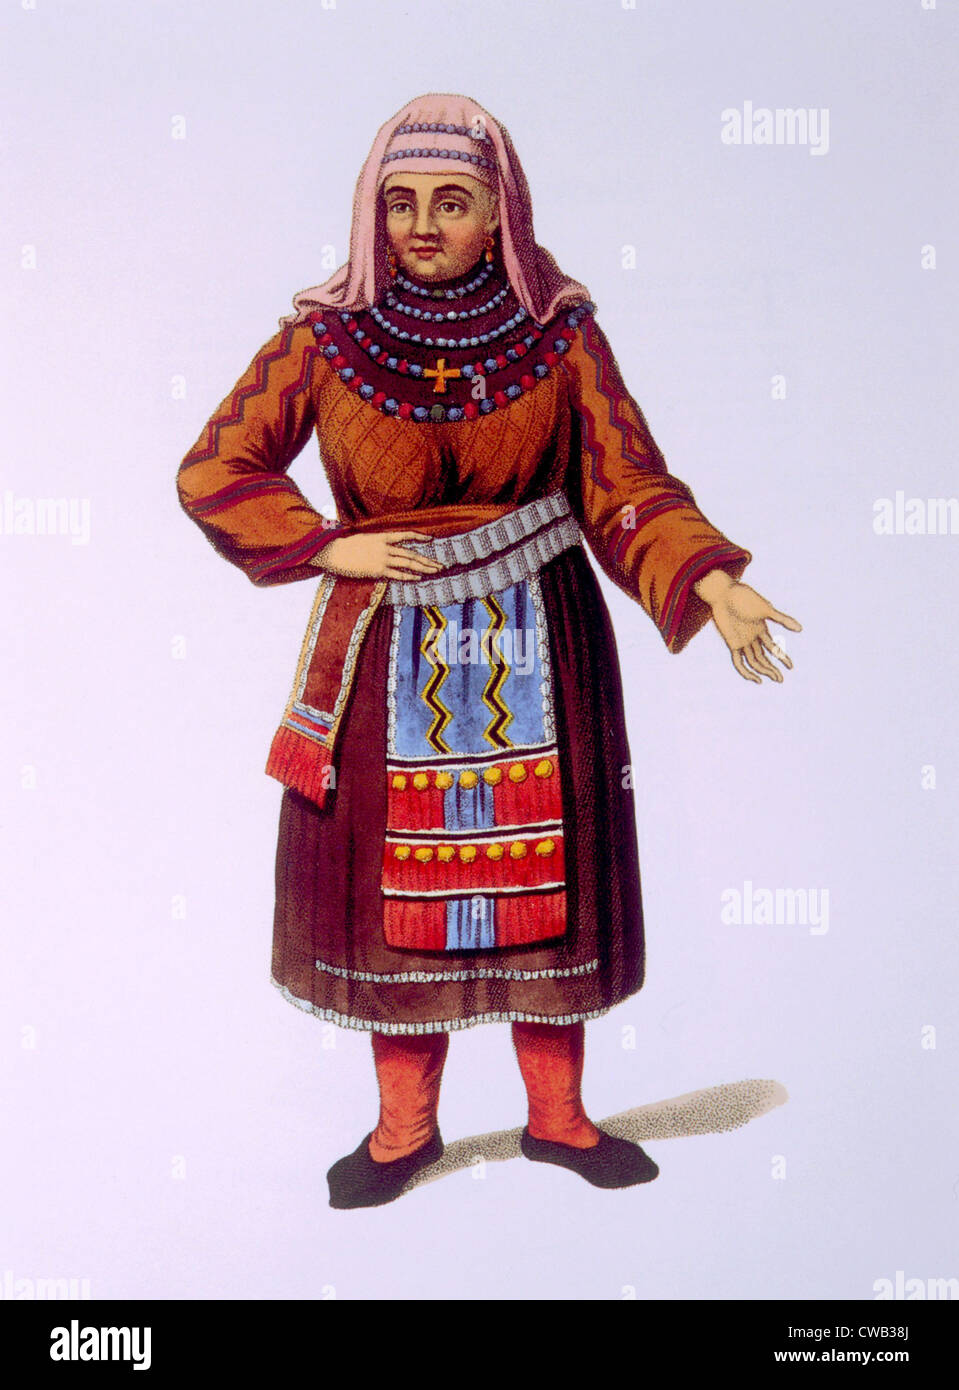 Peasant woman of Finland. hand-colored engraving from Costumes of the Russian Empire, 1803. Stock Photo